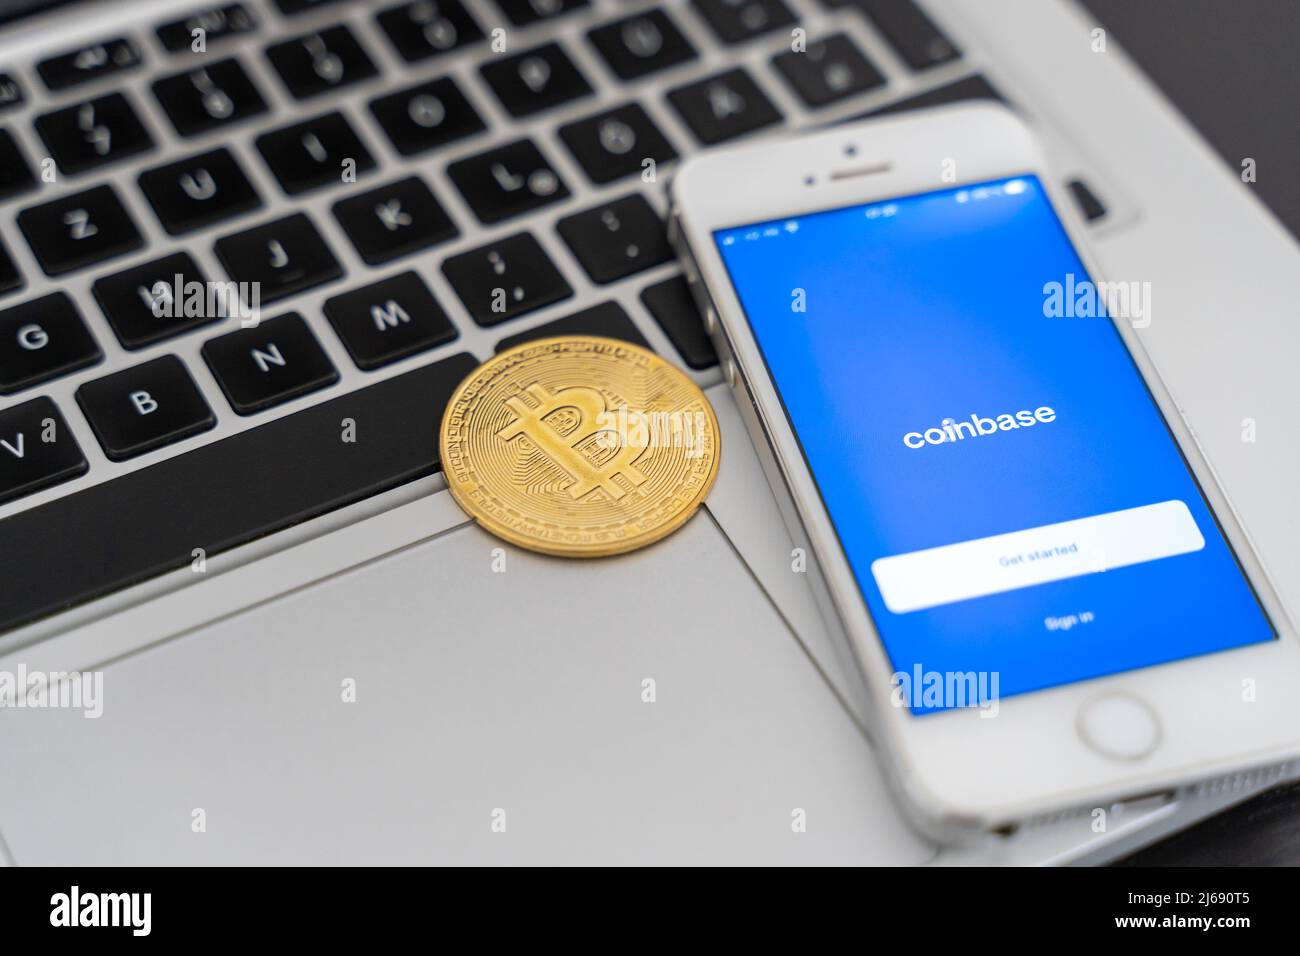 Coinbase app on a smartphone at the day of the IPO on the stock exchange. Marketplace to trade a crypto currency like Bitcoin and Ethereum. Stock Photo